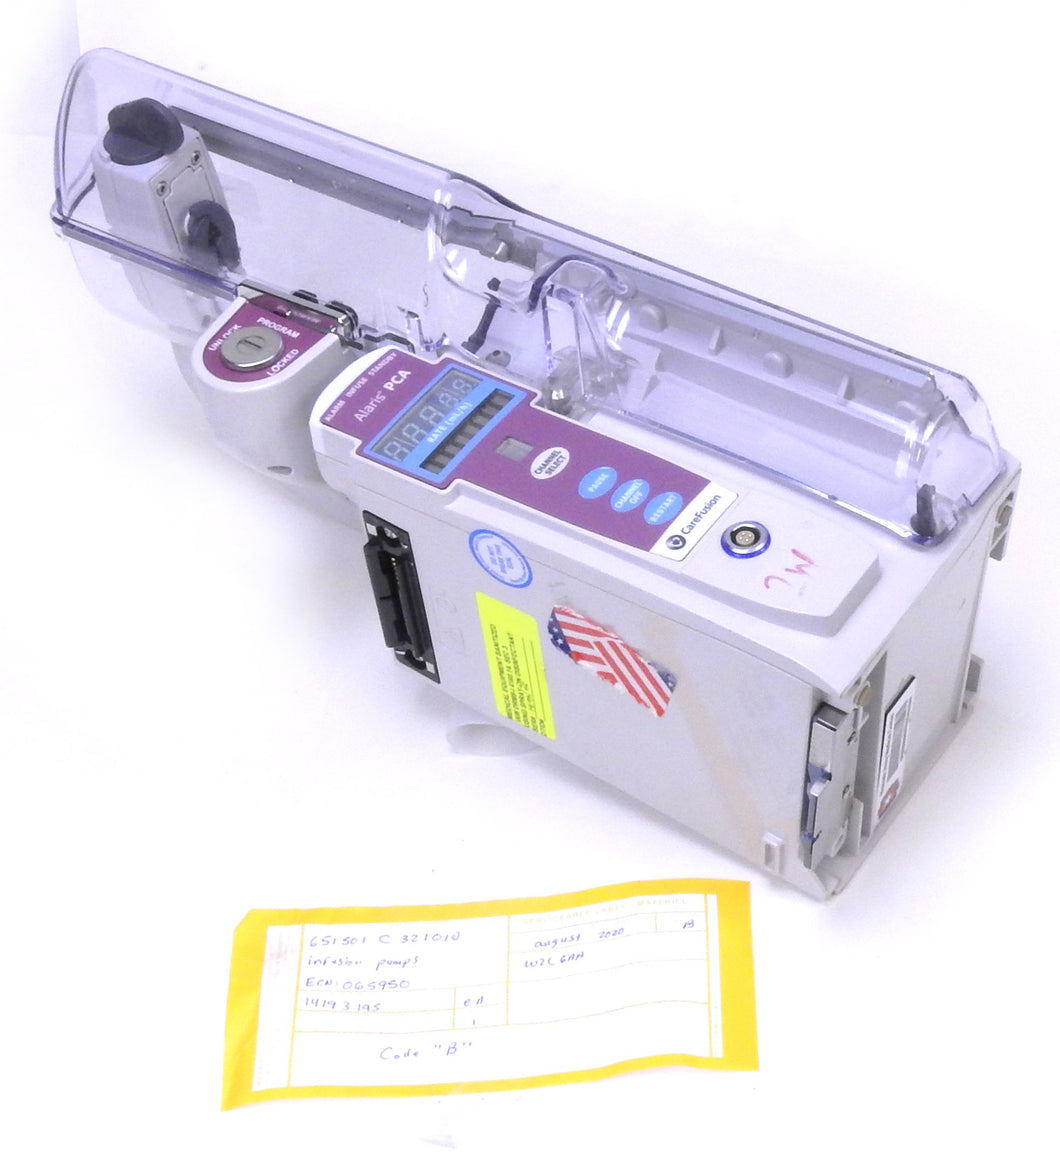 Carefusion Alaris PCA 8120 Infusion Pump Module with Key and certificate of serviceability